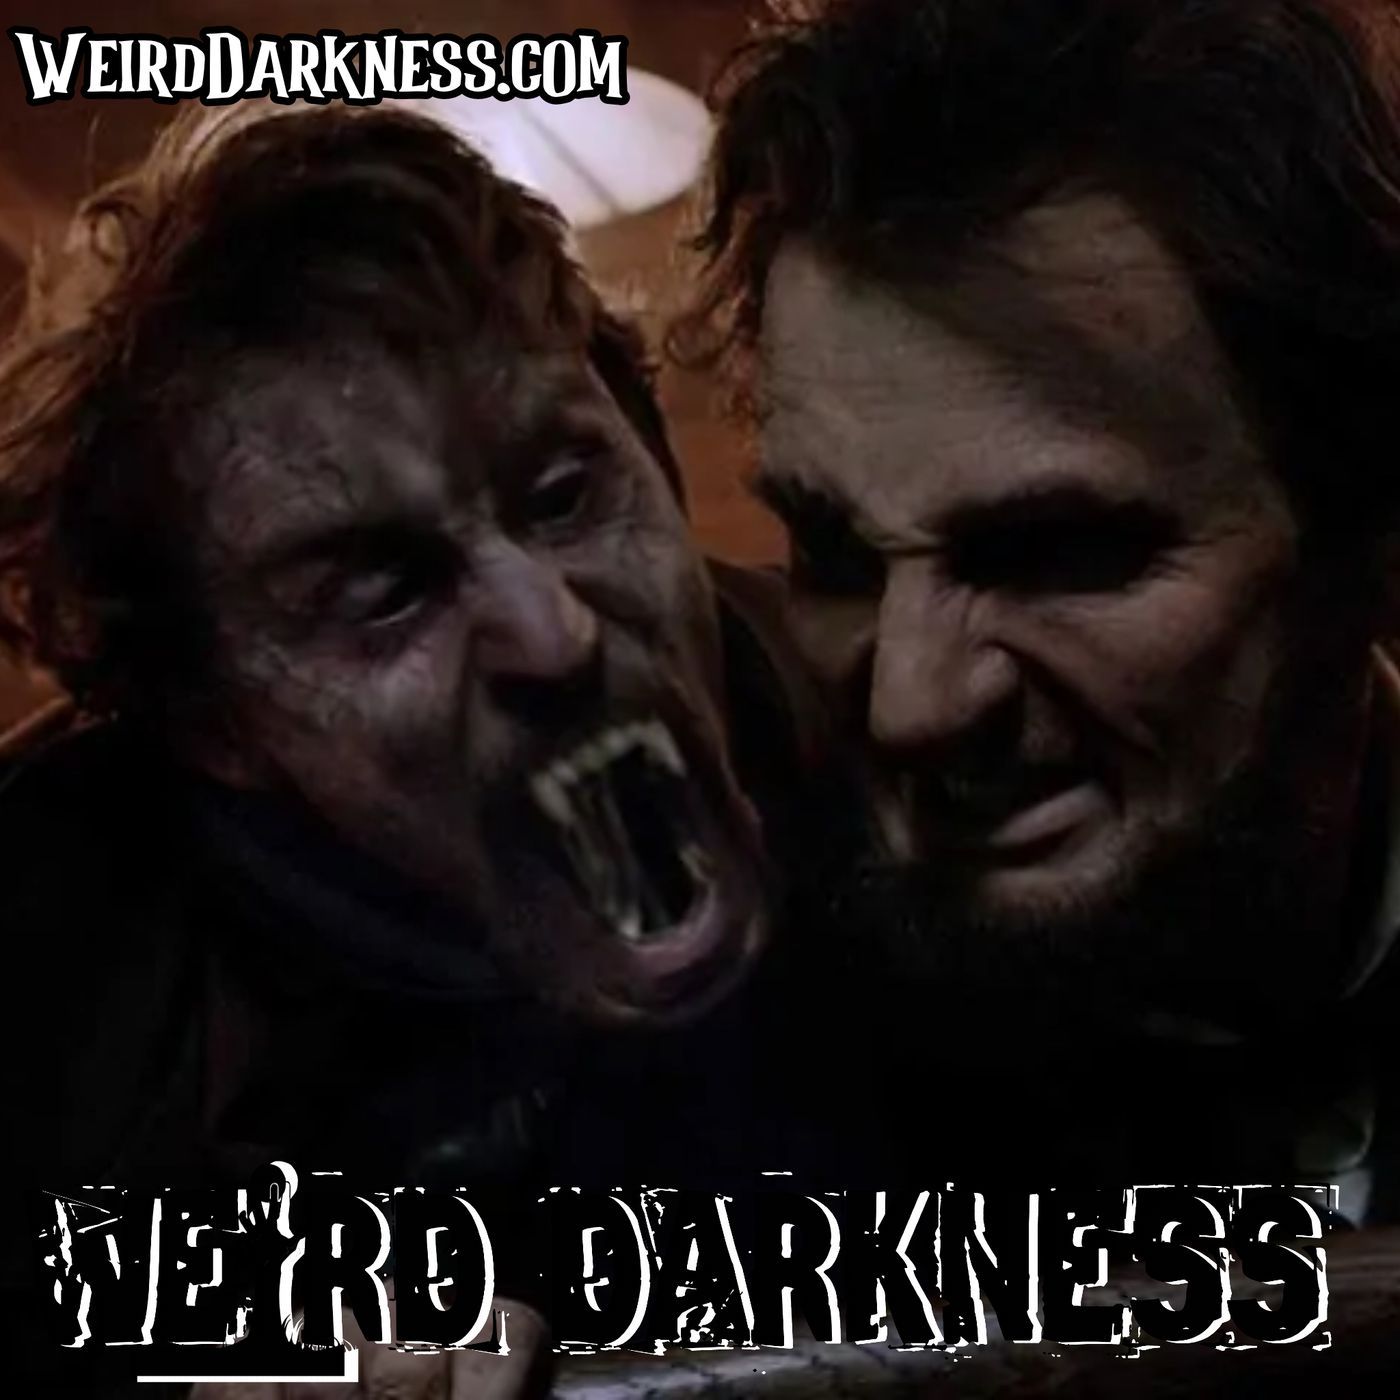 “DID ABRAHAM LINCOLN EVER TRULY DEAL WITH VAMPIRES?” and More! #WeirdDarkness